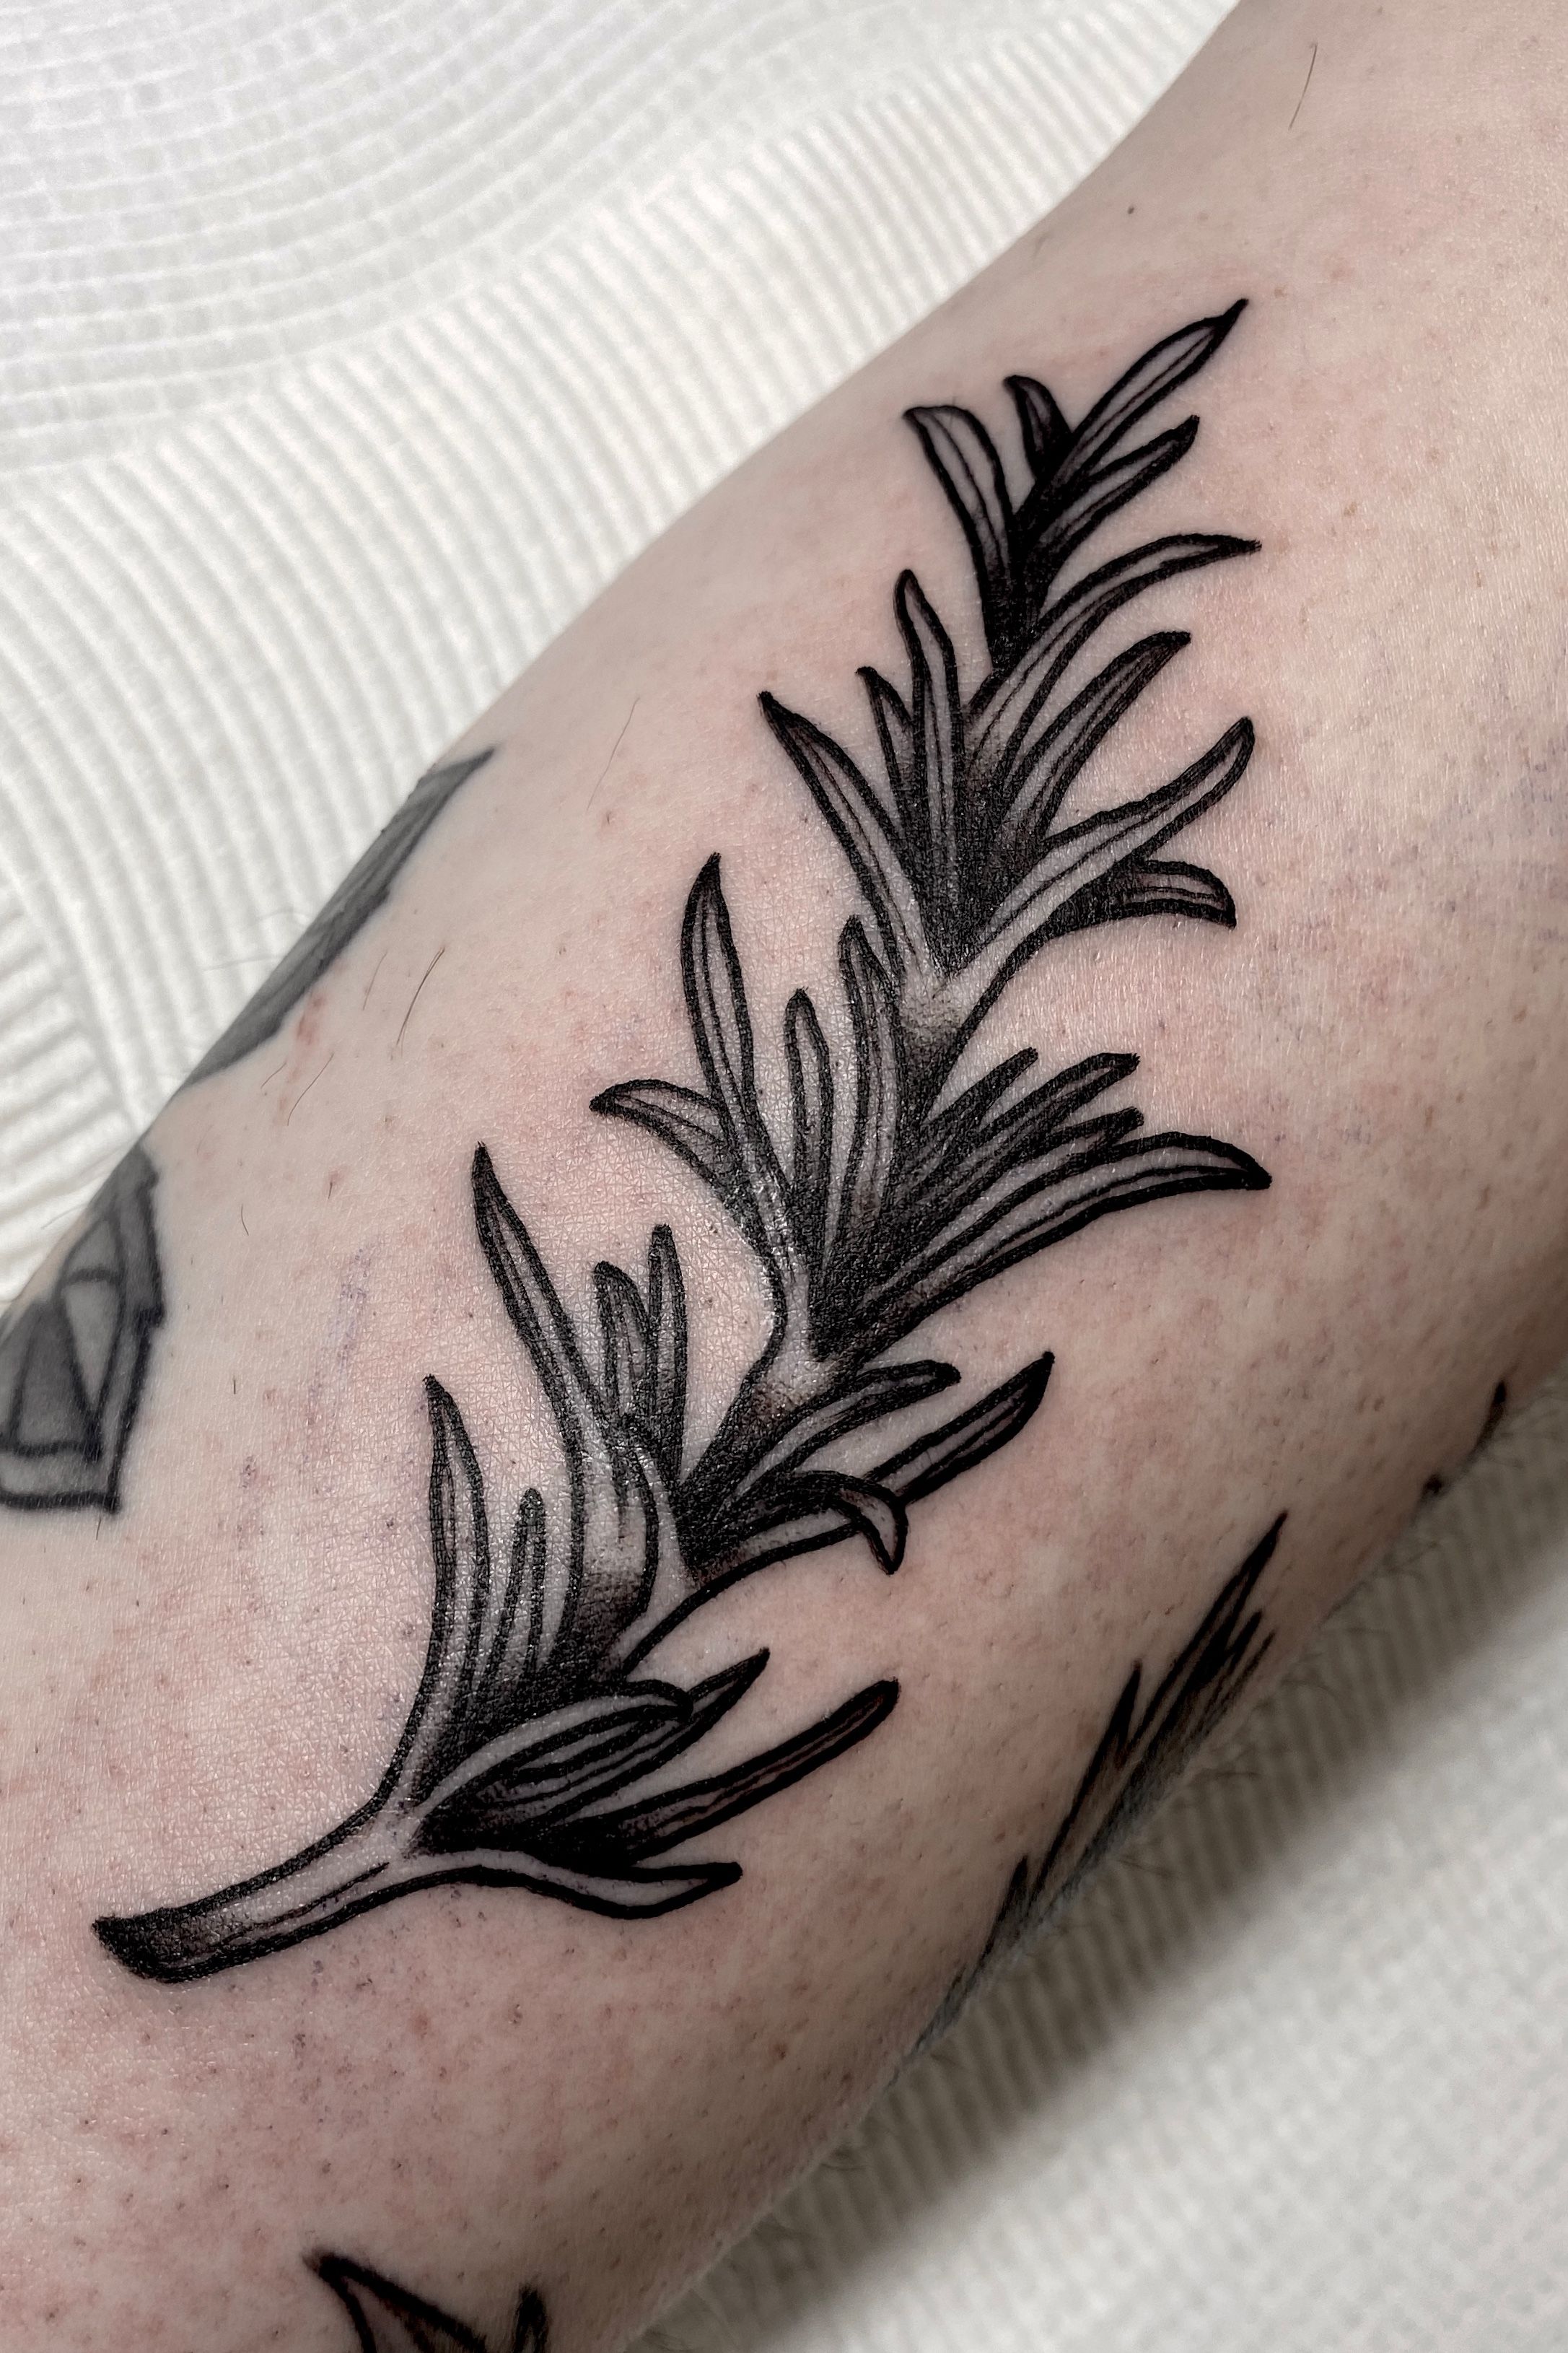 27 Rosemary Tattoo Designs & the Meaning of The Sprig - Tattoo Glee